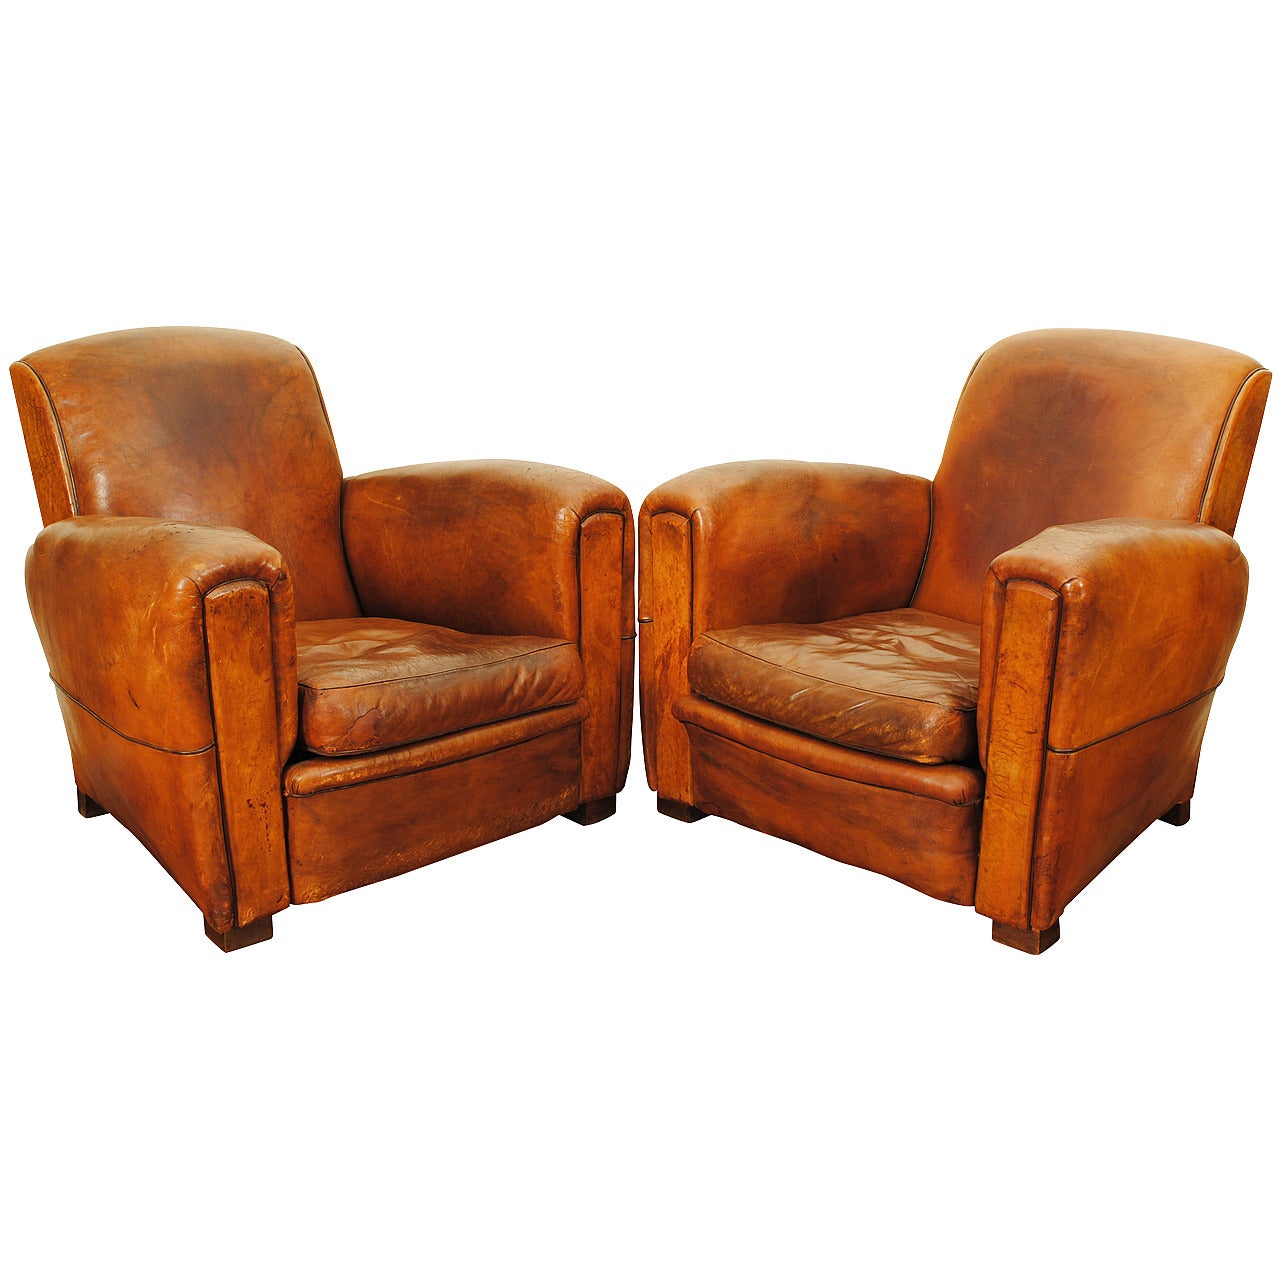 Near-Flawless Pair of French Art Deco Club Chairs